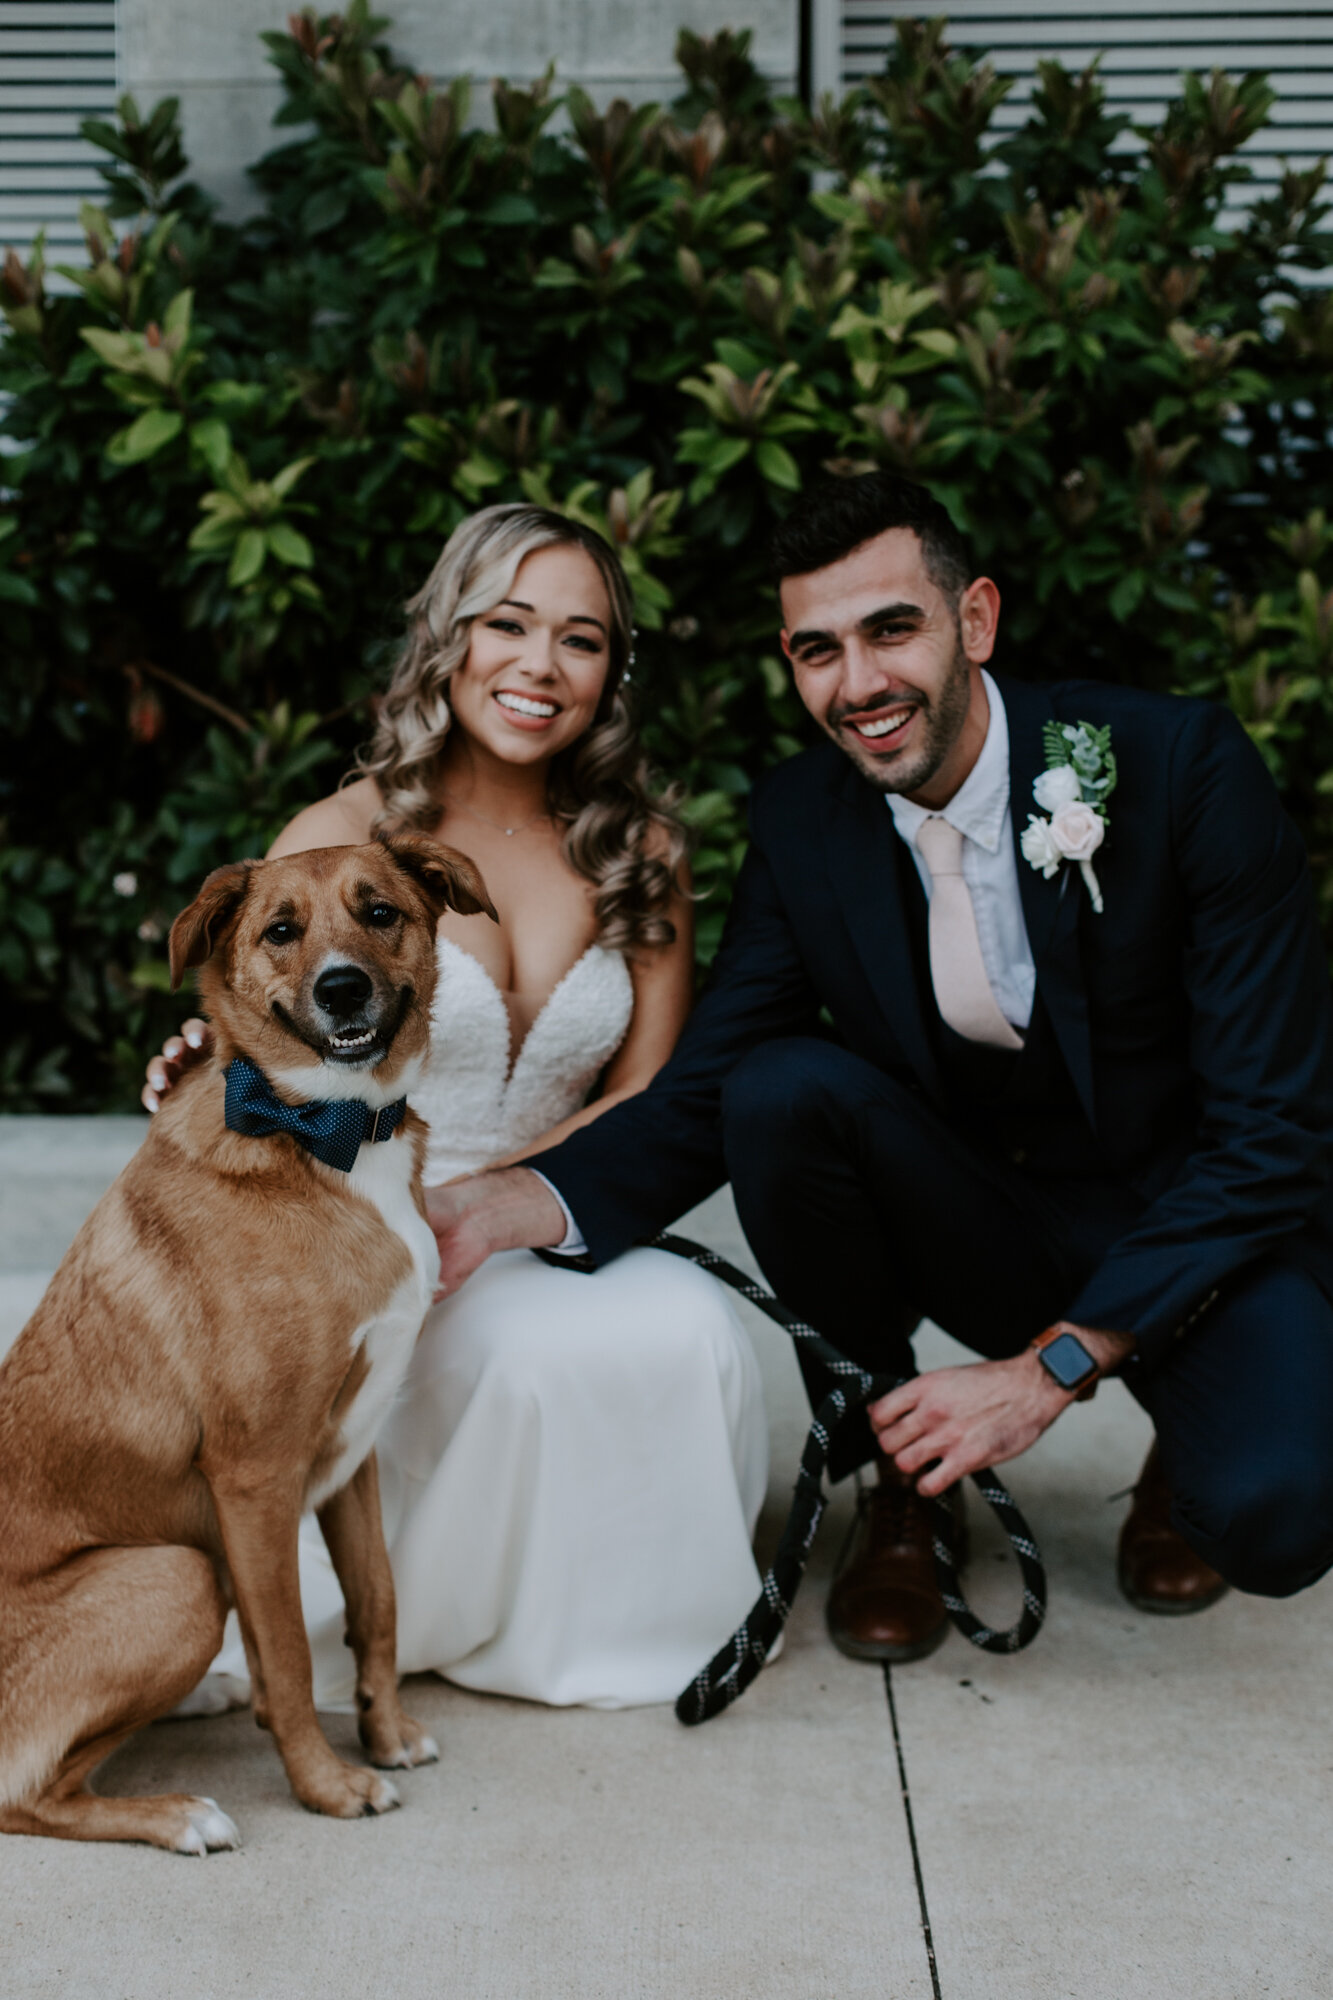 Bride and groom portrait with smiling dog. Glamorous Wedding at The Dunlavy and the Lost Lake Buffalo Bayou Park